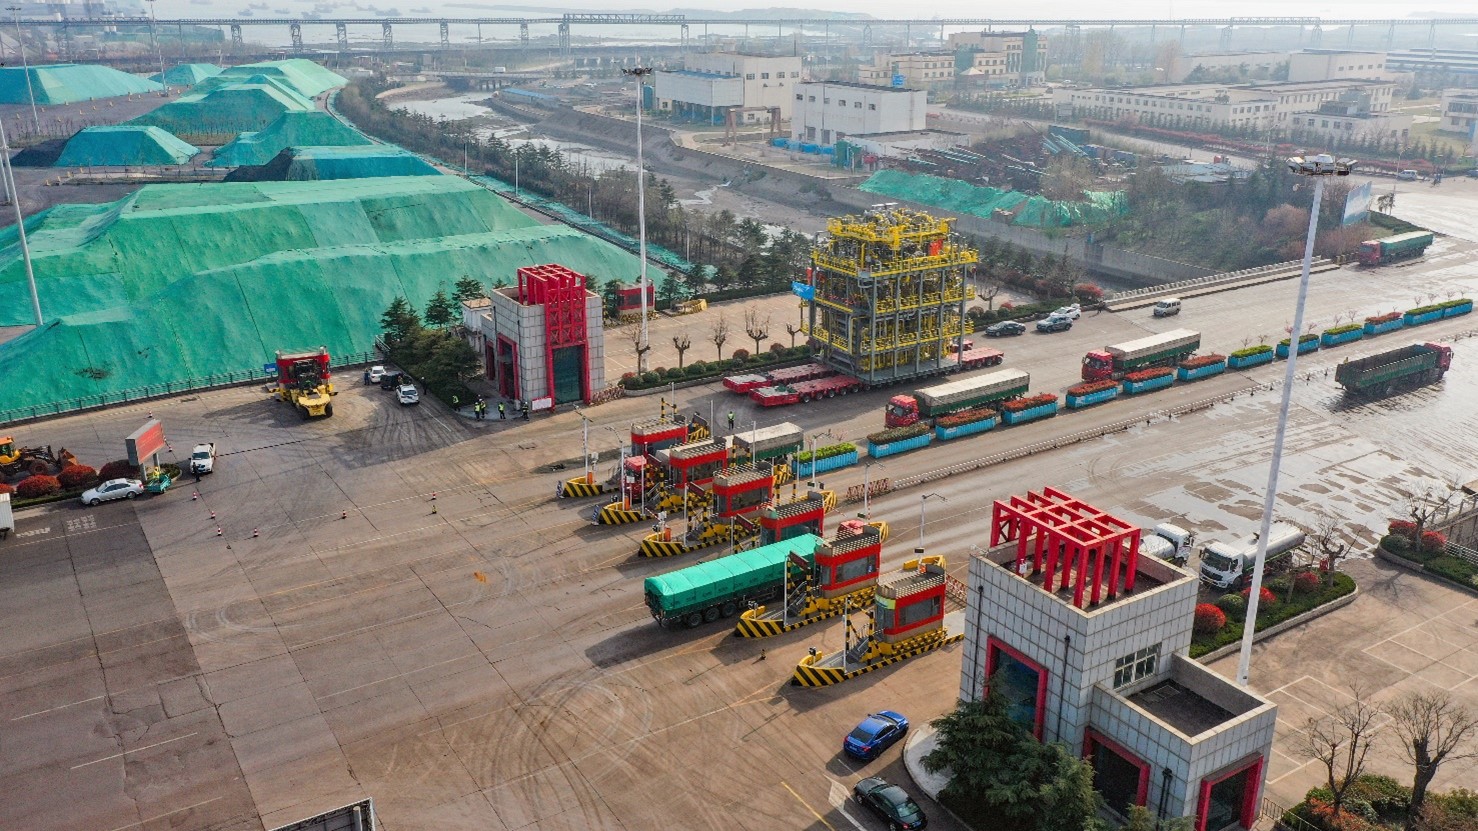 DEUGRO HAVE SUCCESSFULLY DELIVERED A 392-METRIC-TON CO2 REMOVAL SYSTEM FROM RIZHAO TO THE COSCO SHIPYARD QIDONG, CHINA,